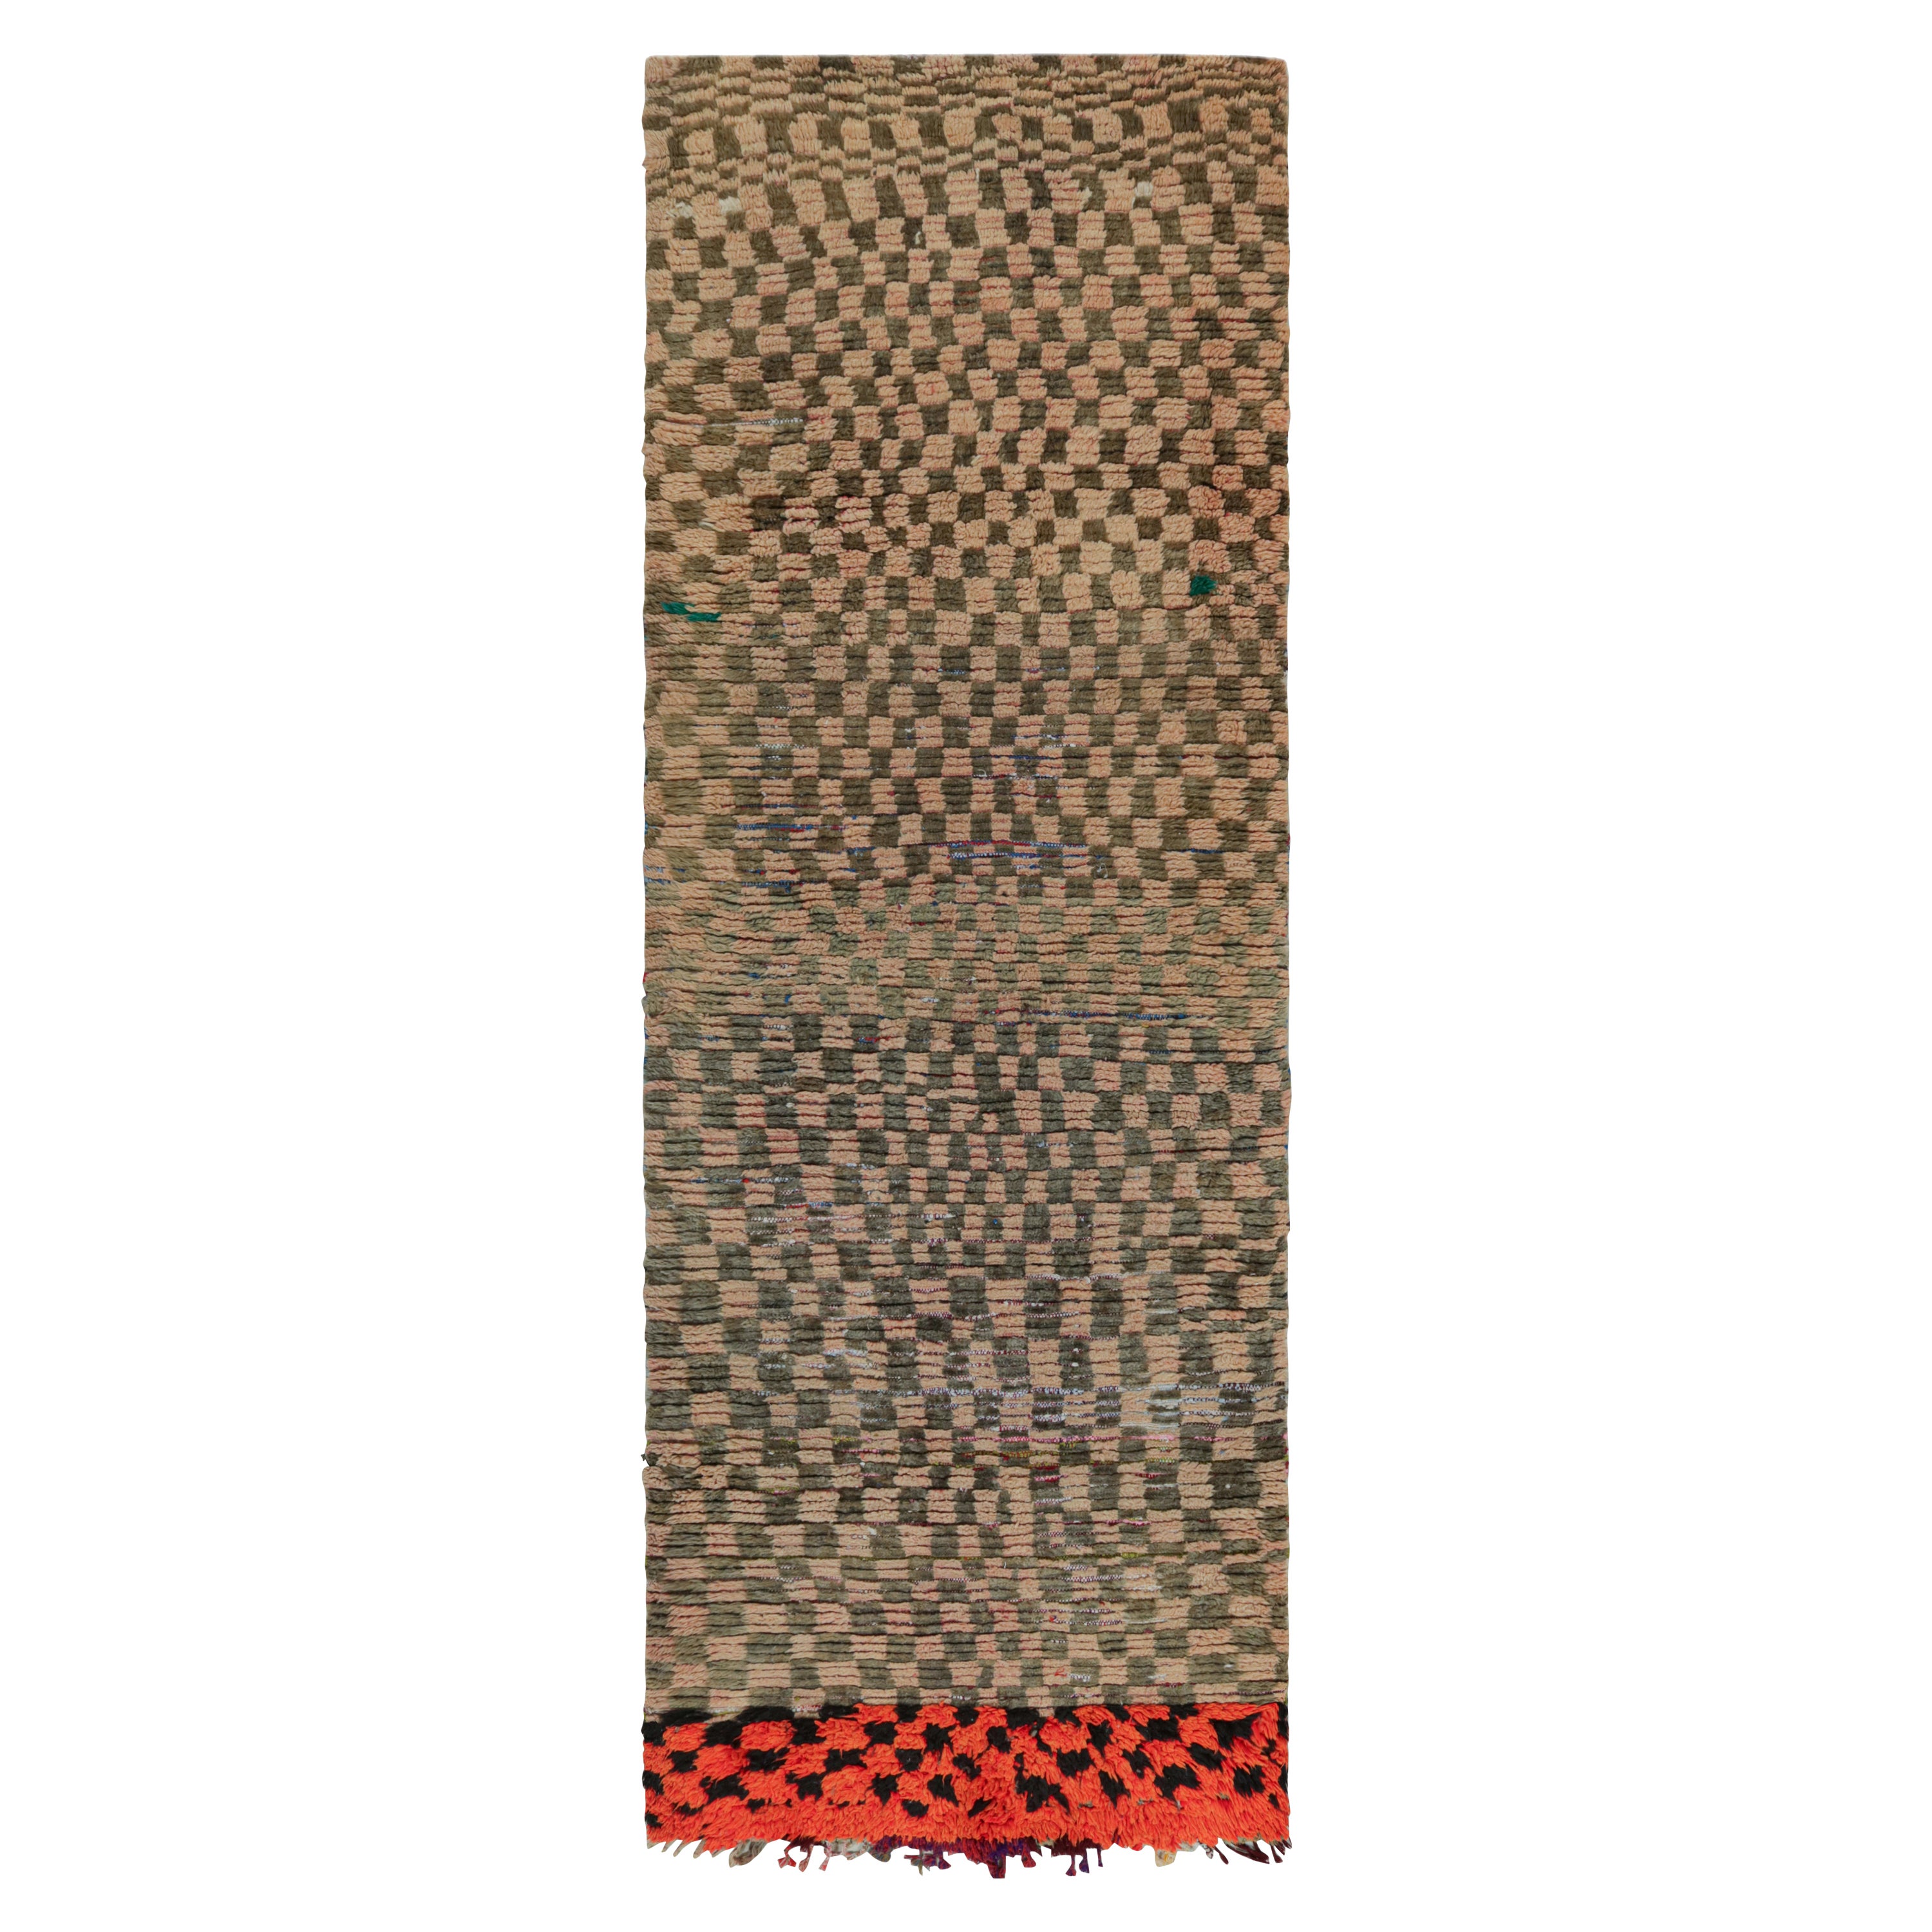 1950s Azilal Moroccan runner rug in Polychromatic Tribal Patterns by Rug & Kilim For Sale